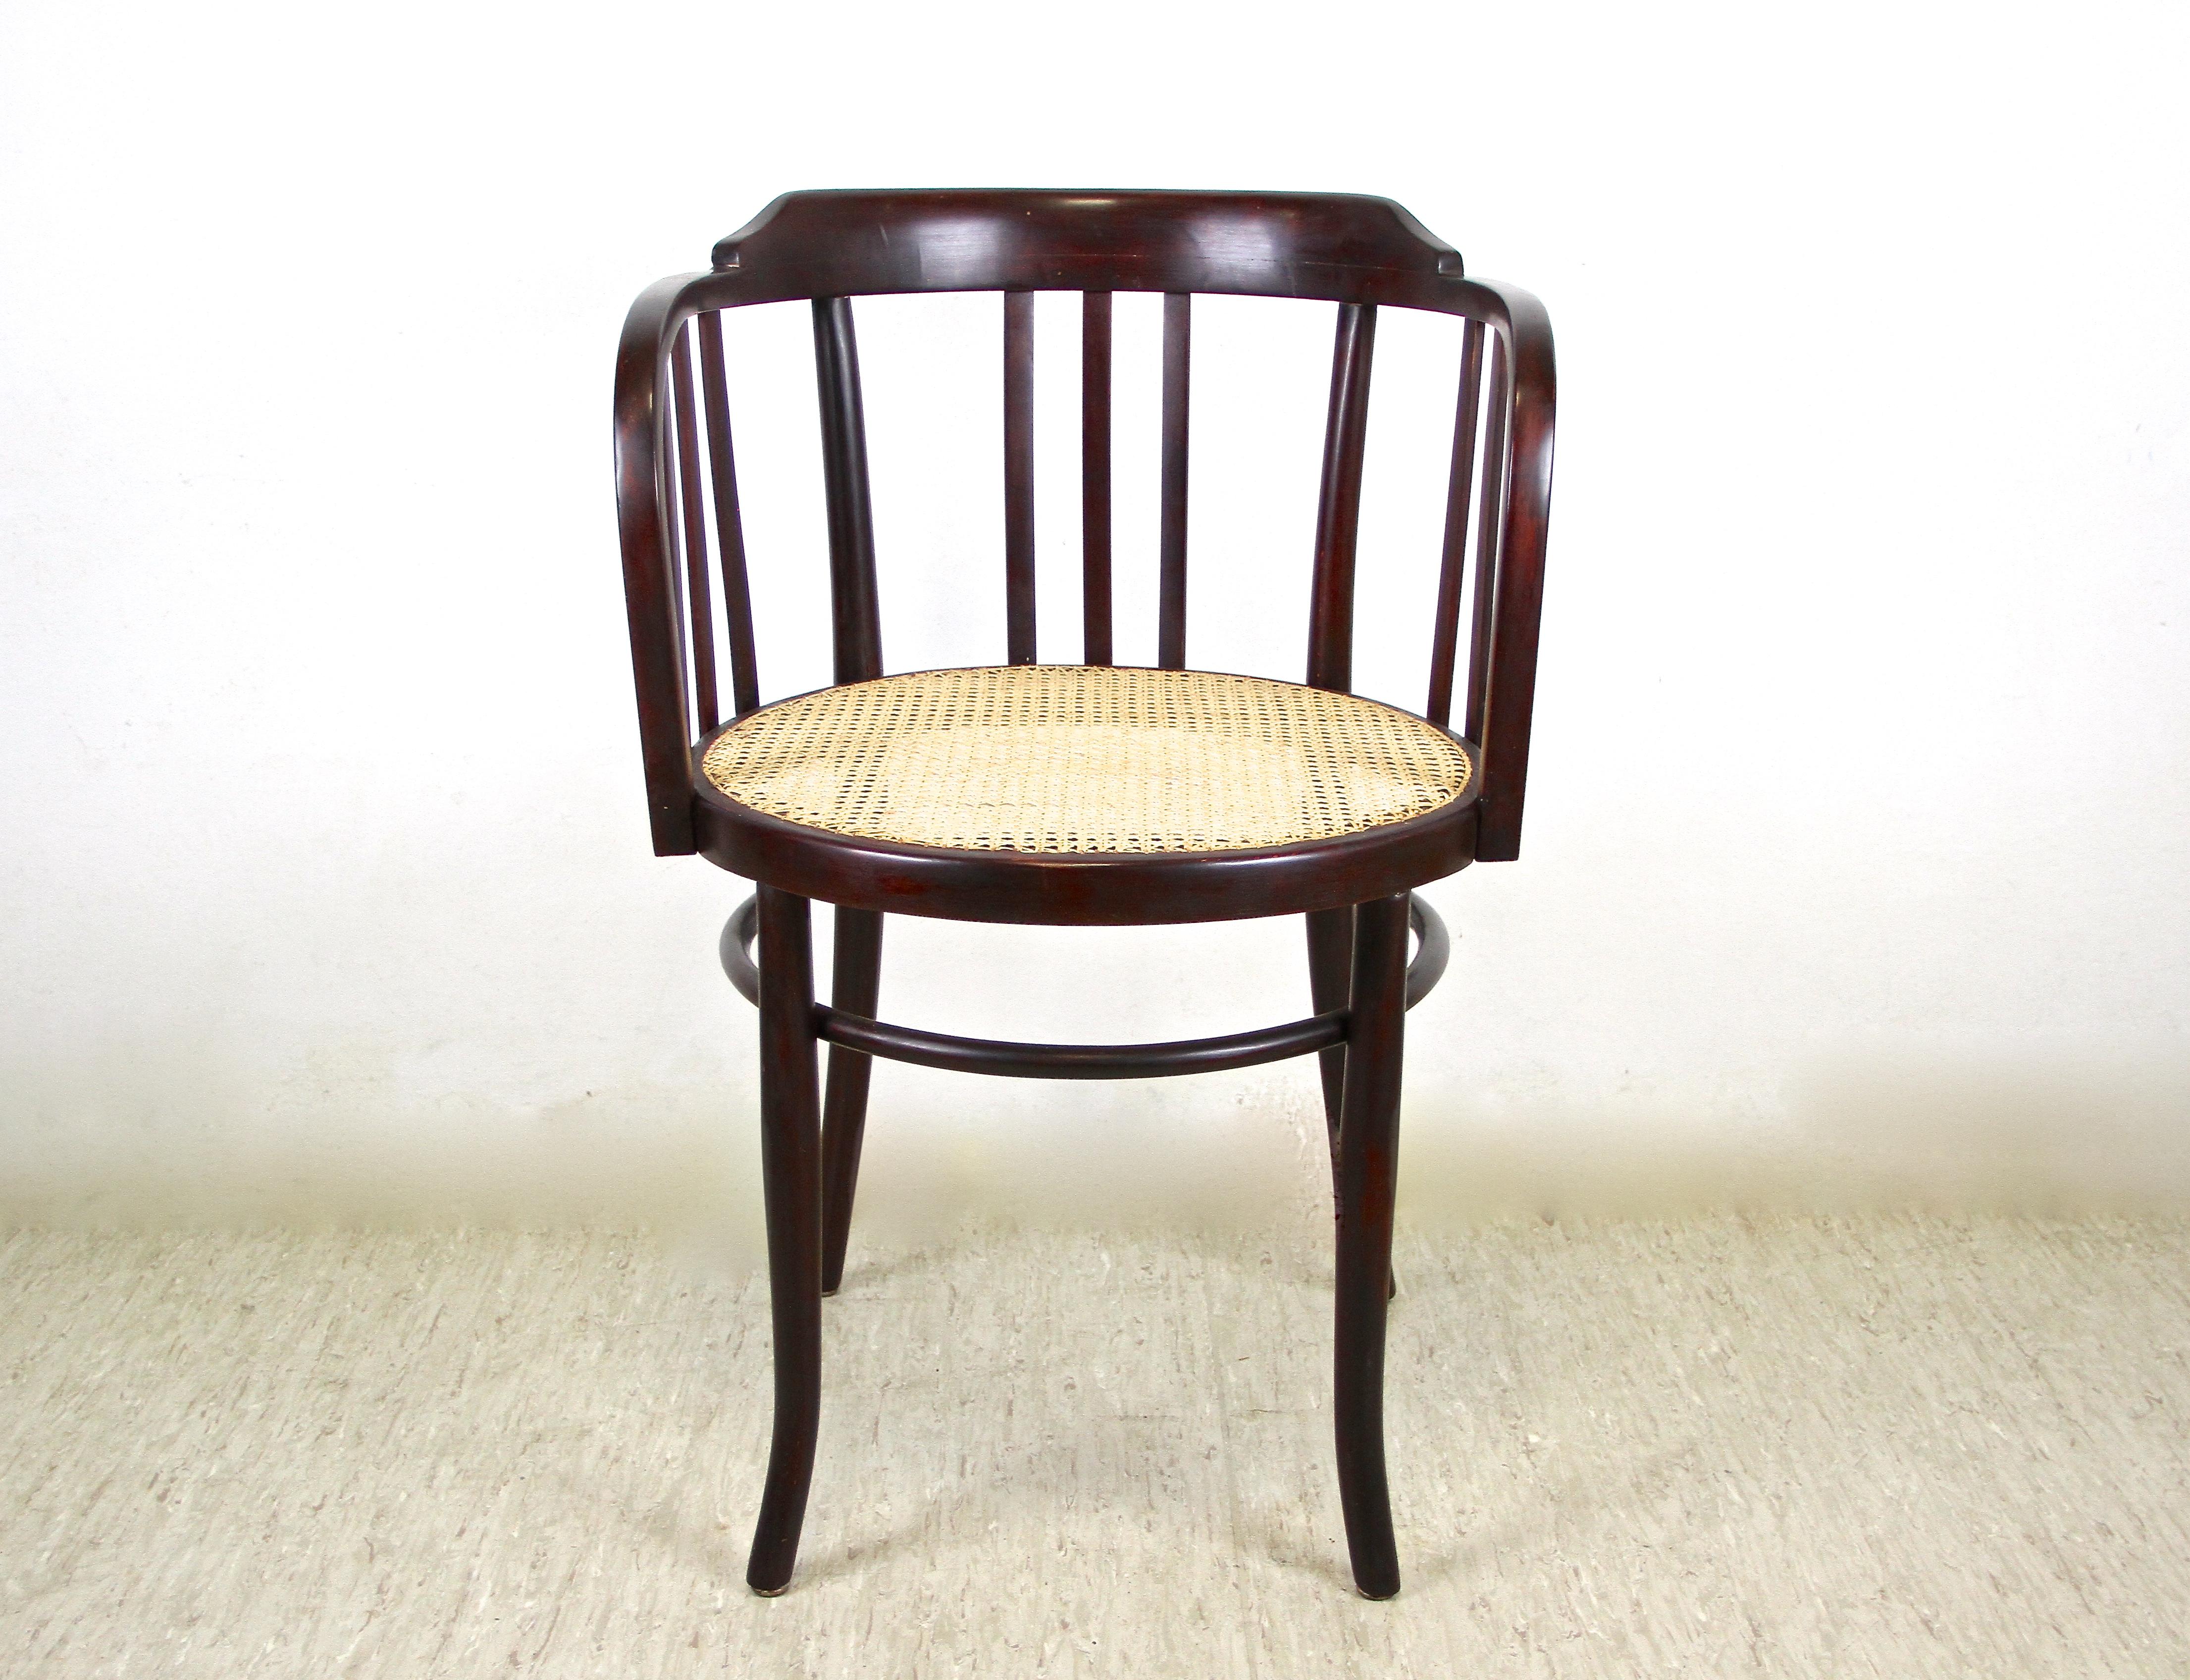 Beautiful bentwood armchair with Vienesse Mesh artfully made by the famous company of Mundus around 1906. A timeless designed masterpiece from the Art Nouveau period in Austria. This fantastic shaped armchair was made of fine bentwood, trimmed to a